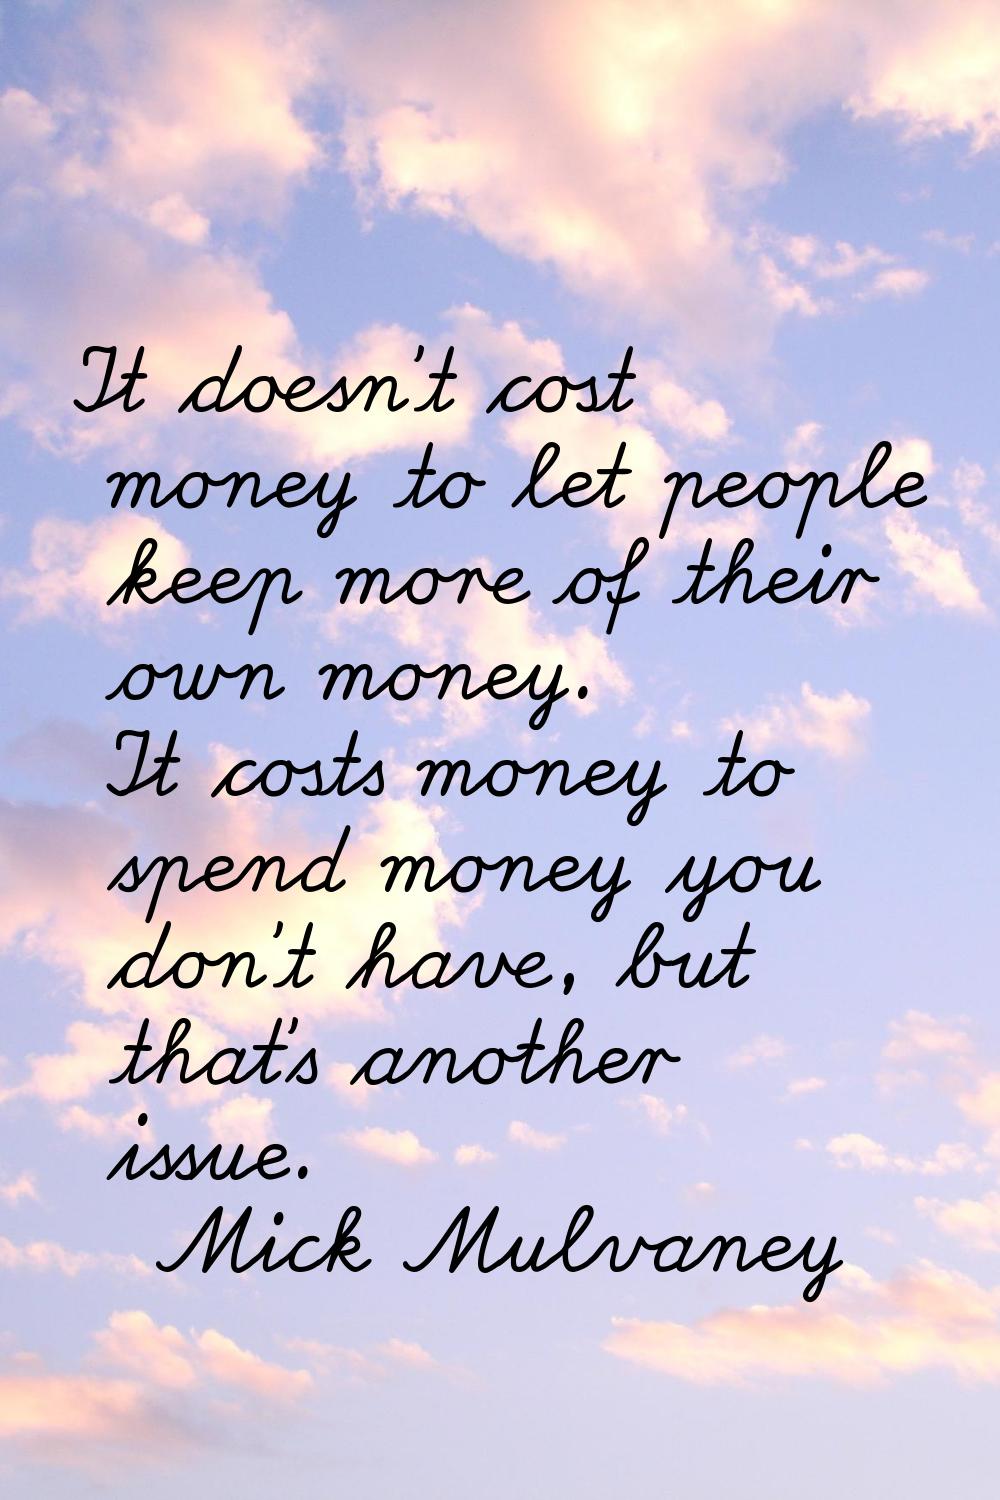 It doesn't cost money to let people keep more of their own money. It costs money to spend money you